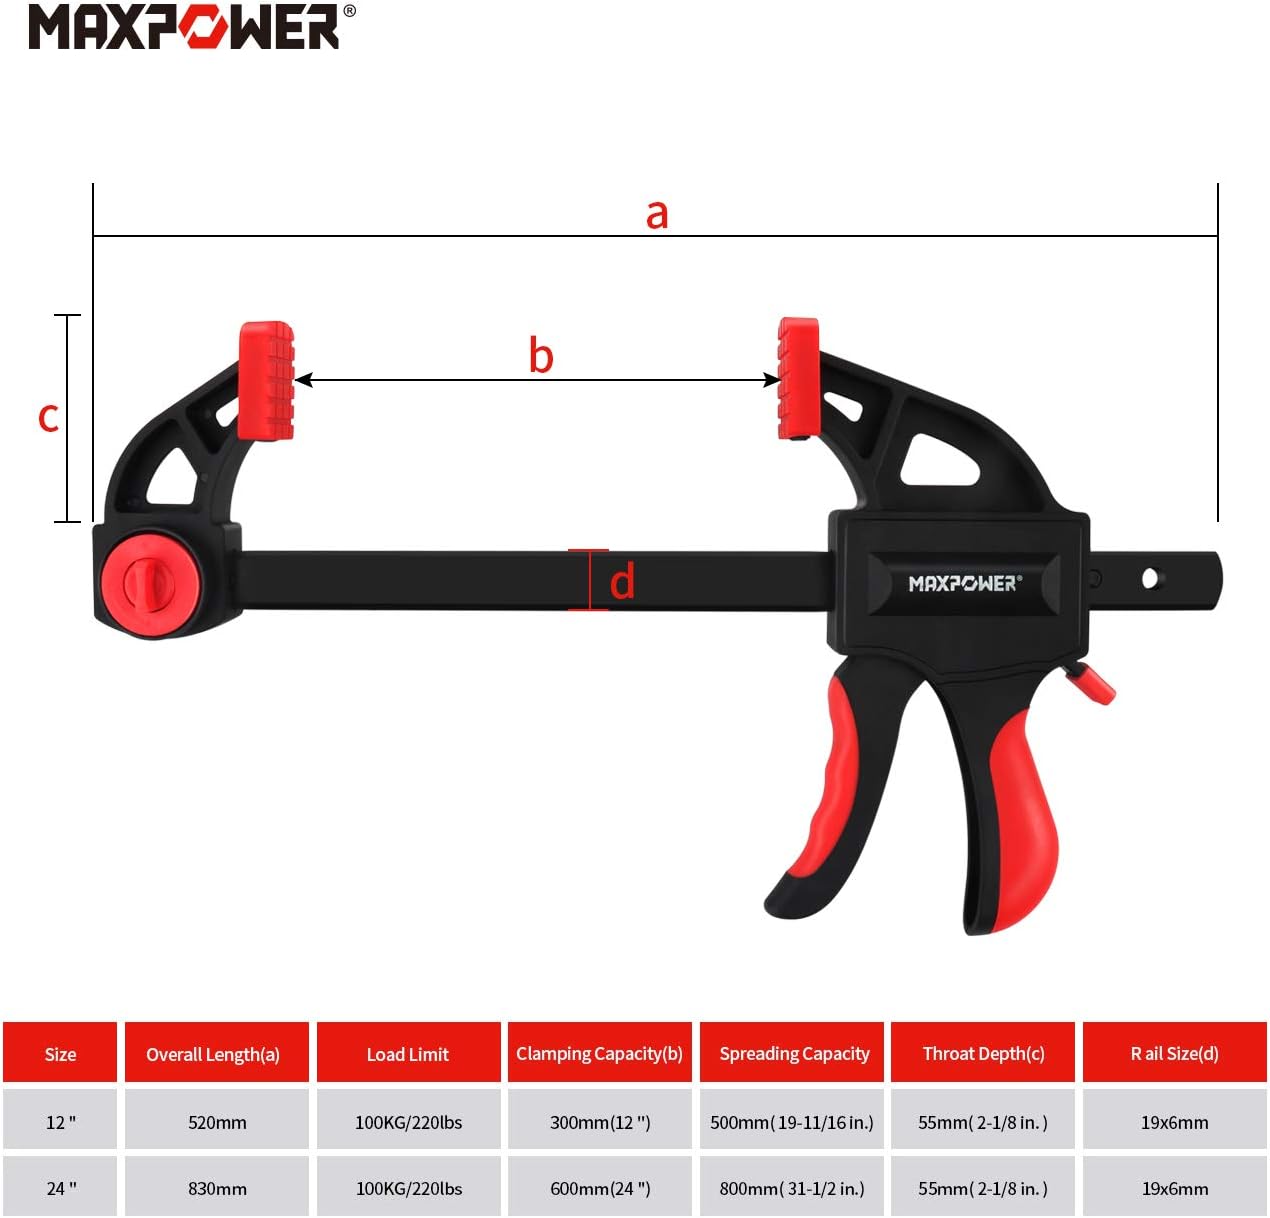 MAXPOWER 24-inch Bar Clamp Review